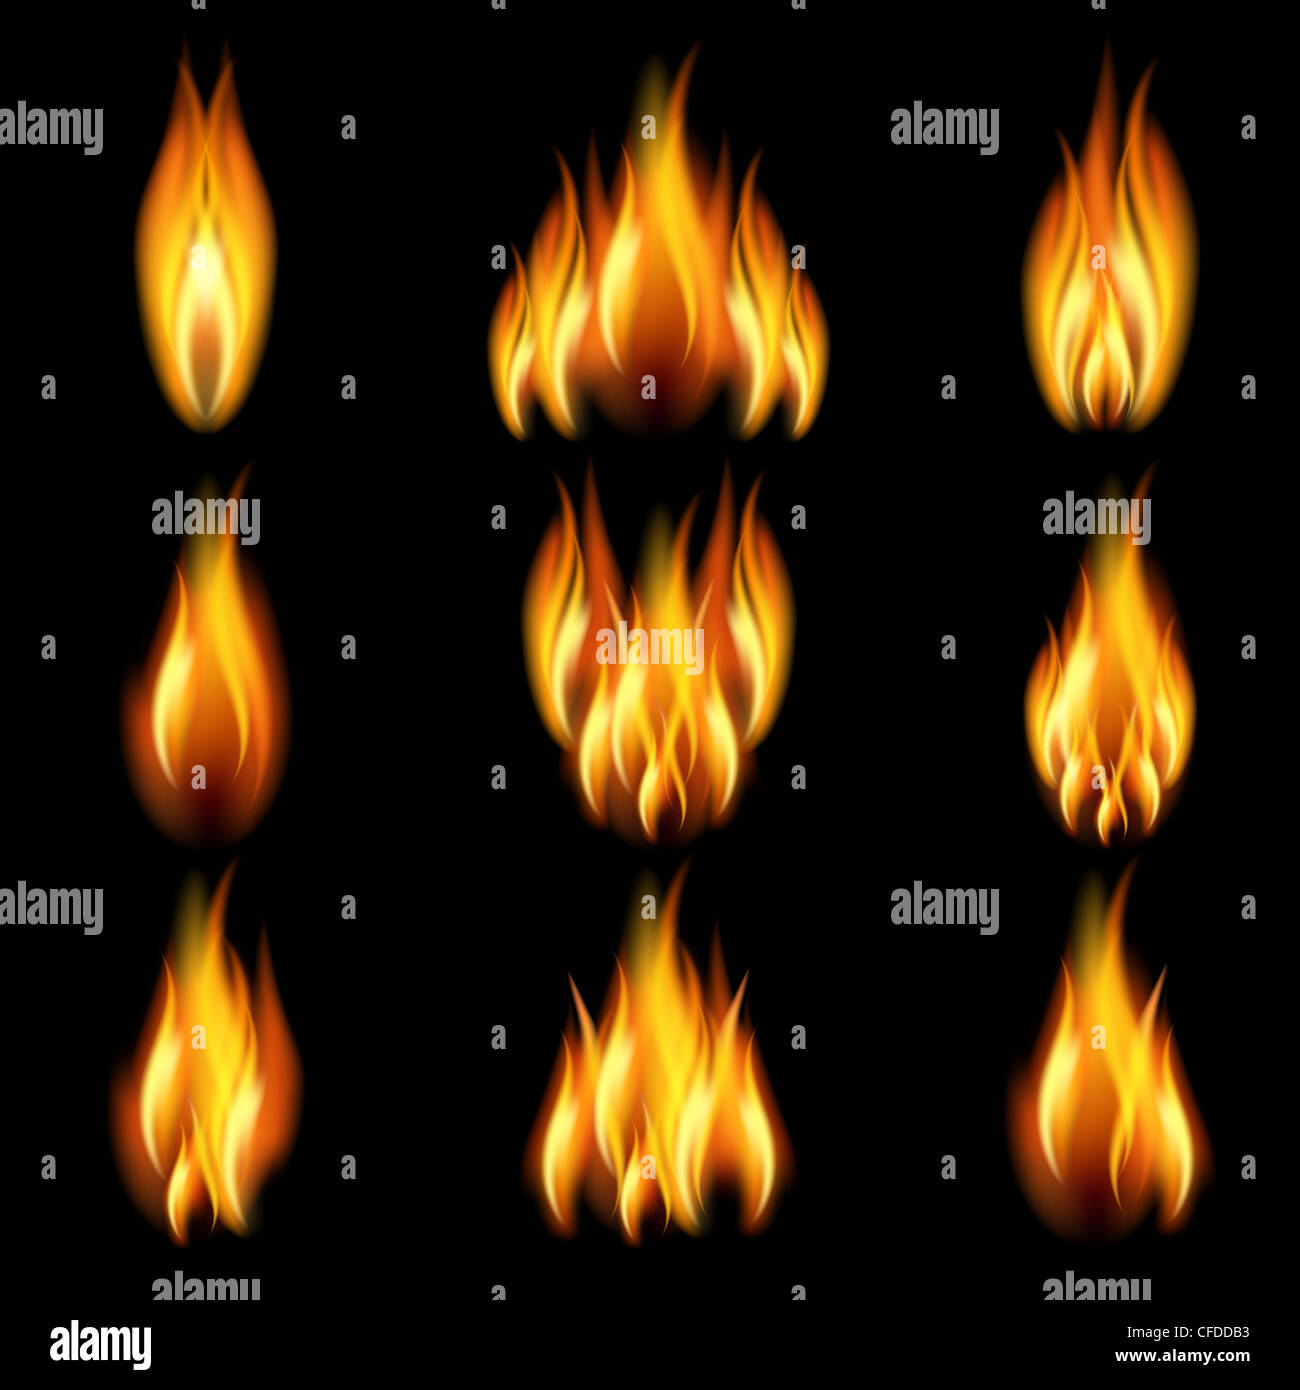 Flames of different shapes on a black background. Stock Photo